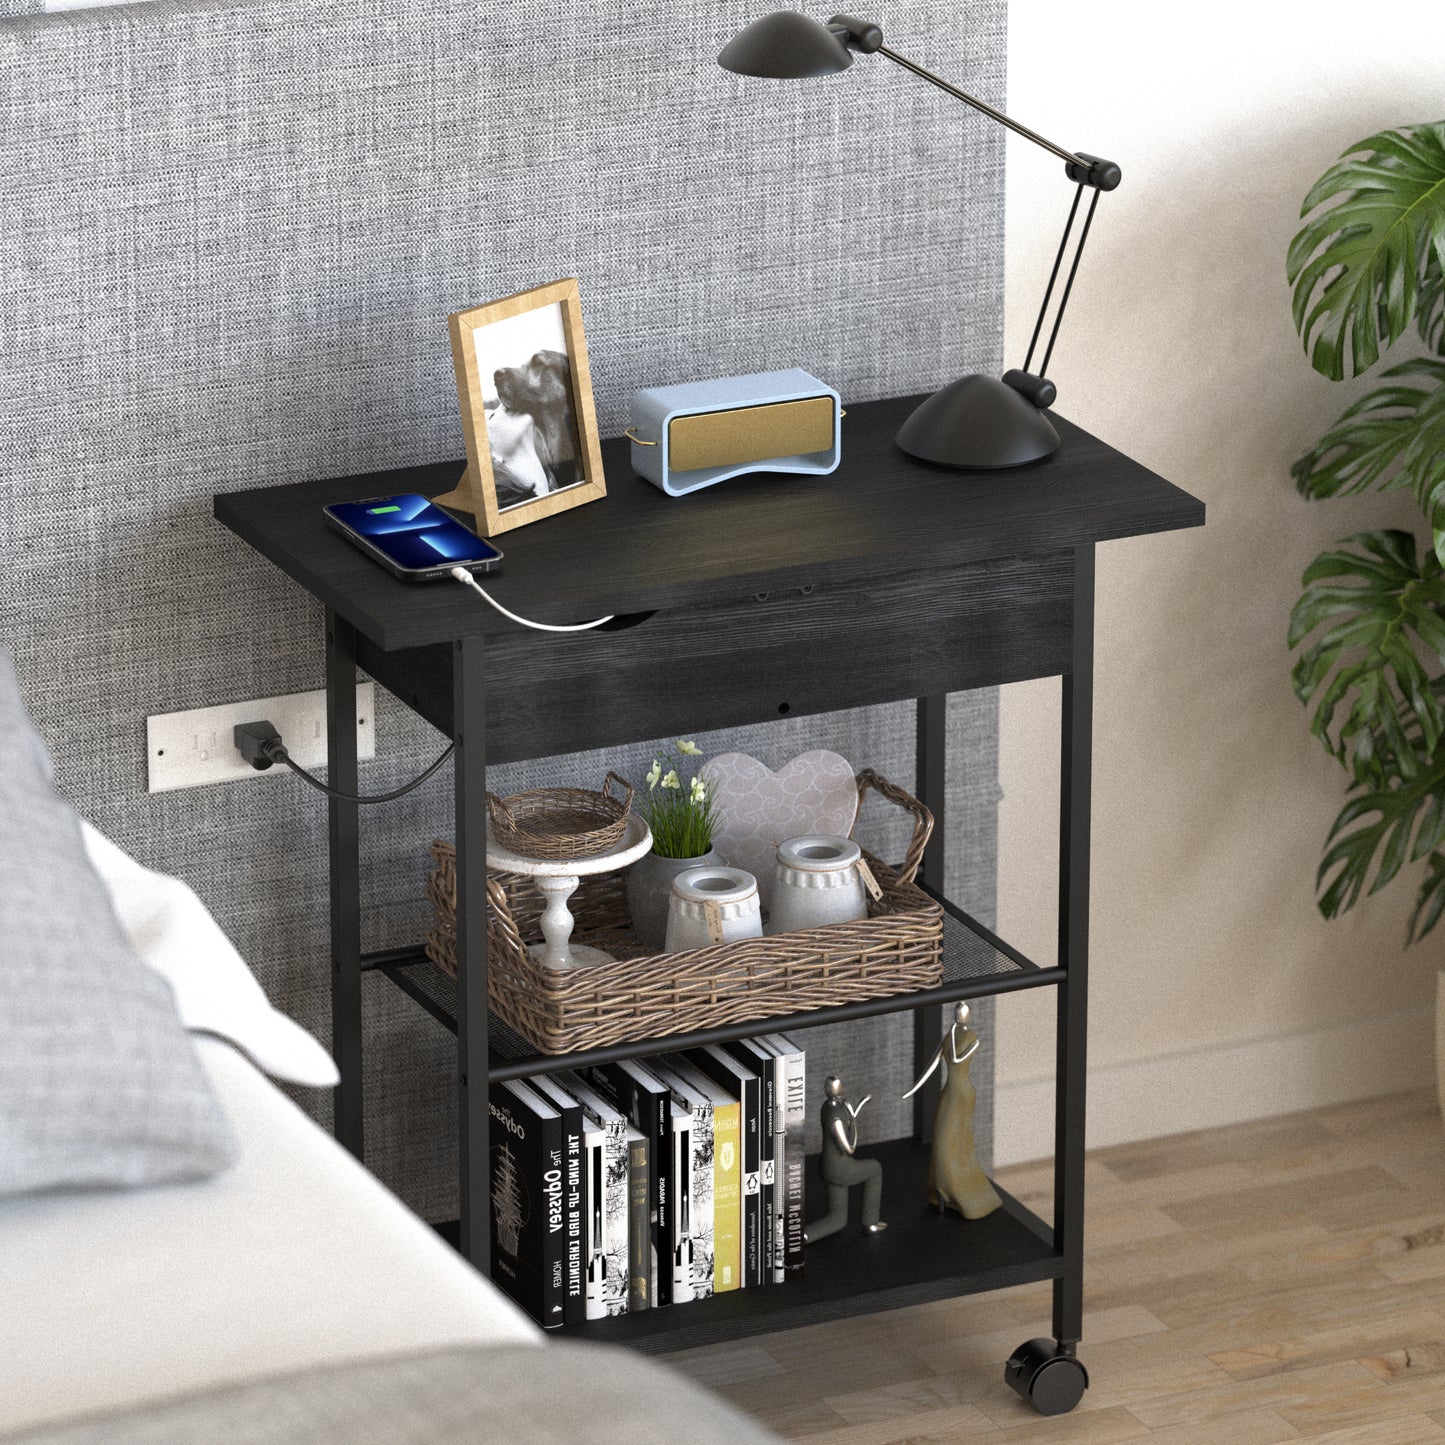 Wheel End Table with Storage and Built-In Outlets